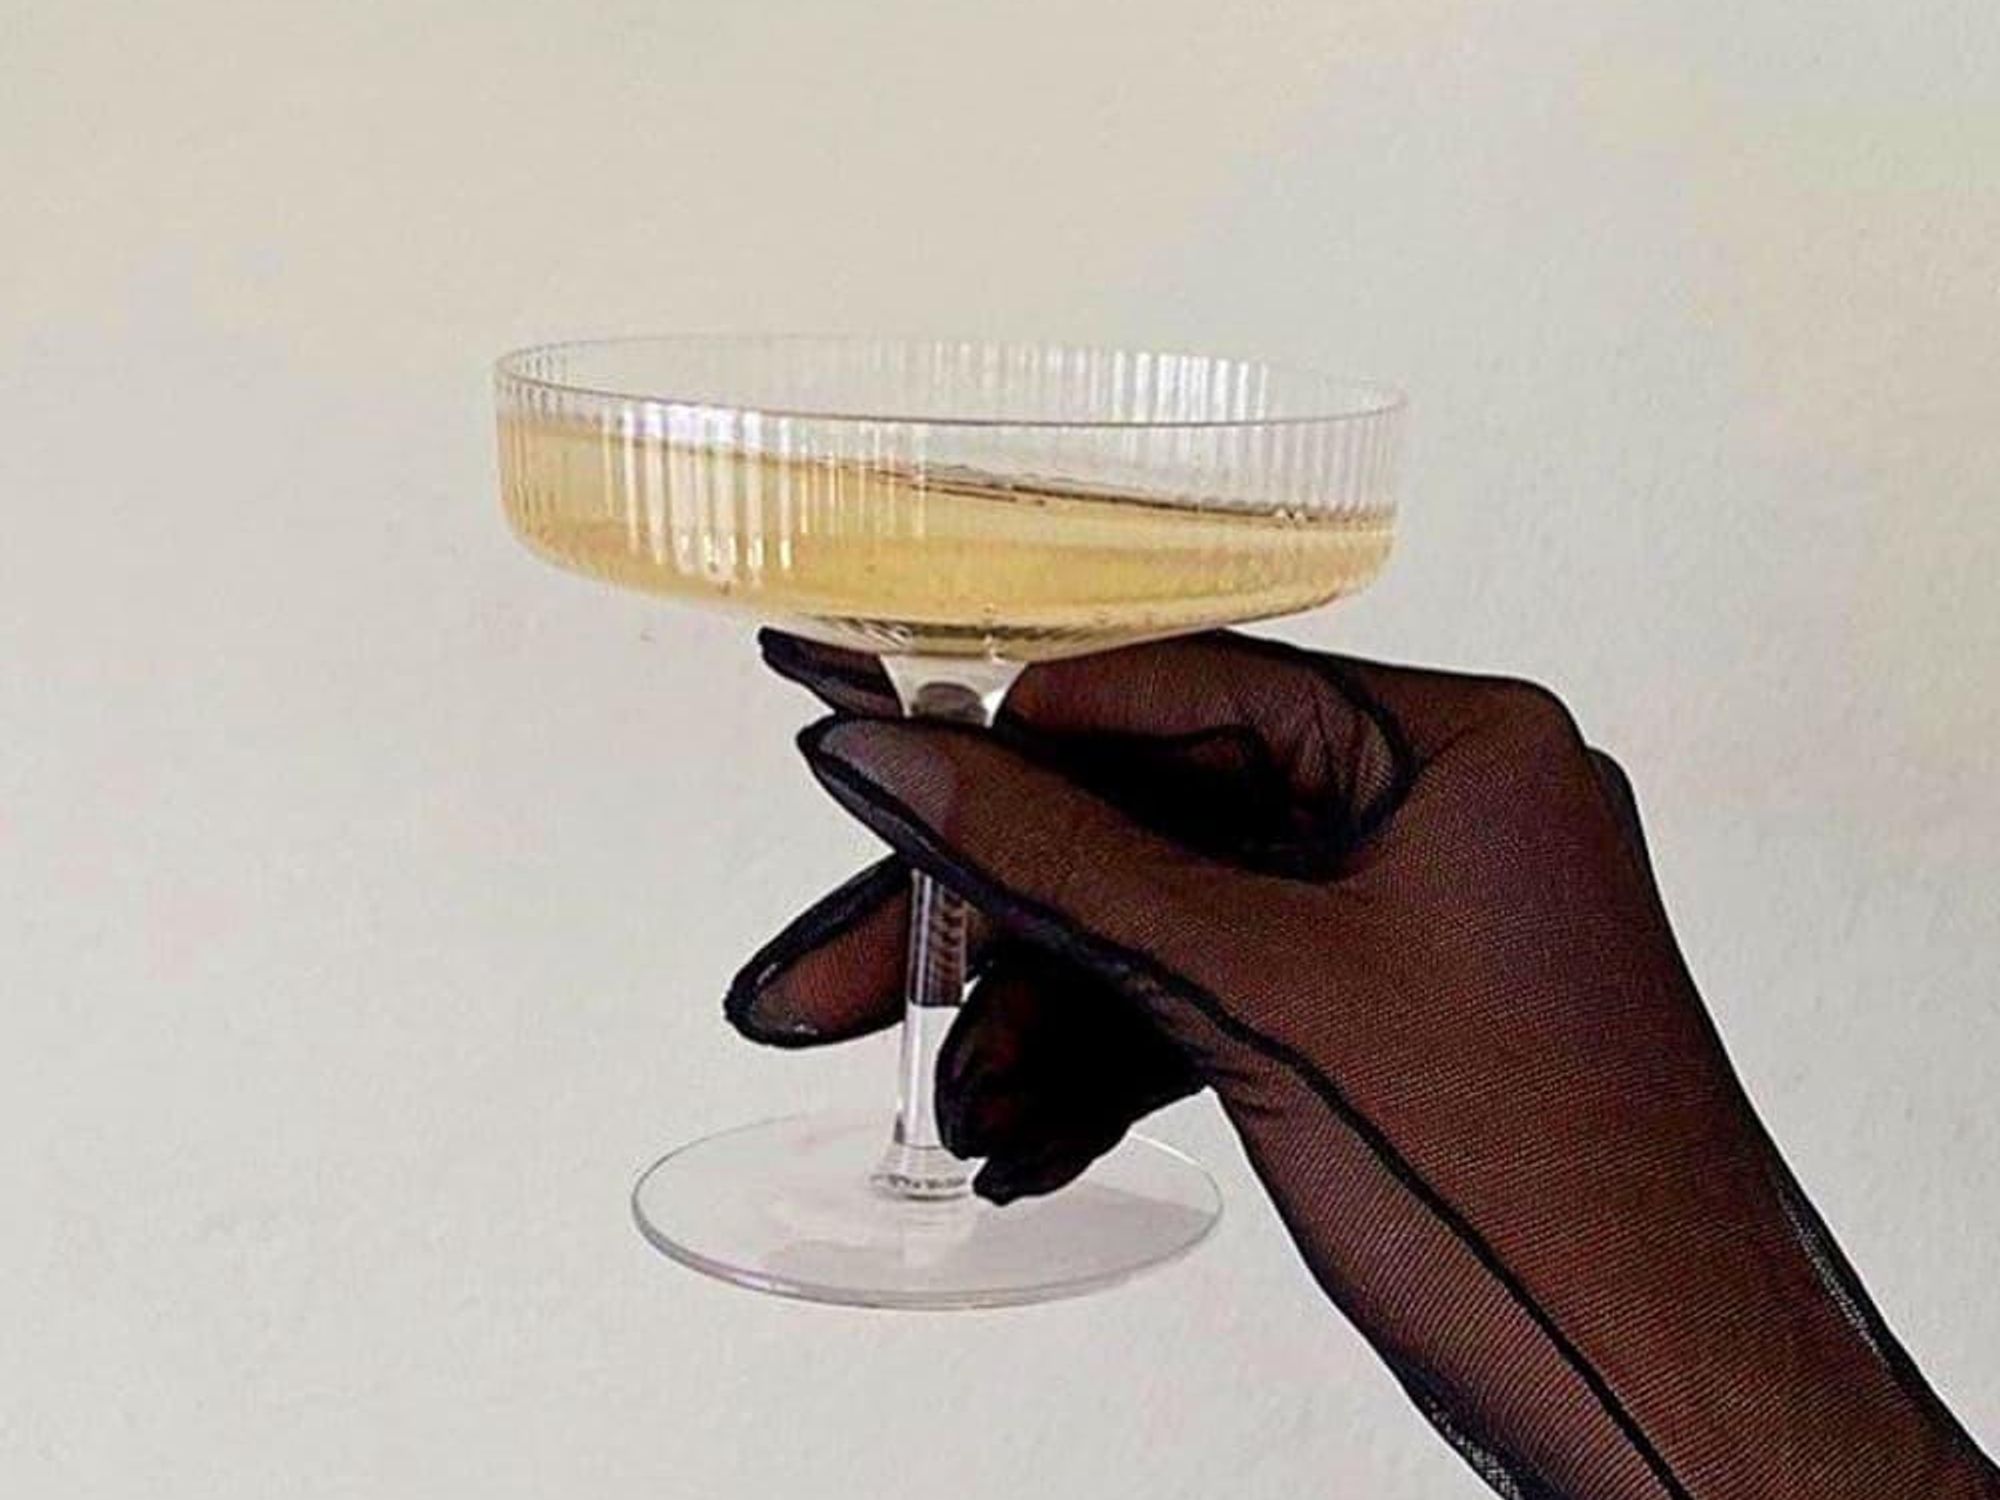 https://dallas.culturemap.com/media-library/champagne-glass.jpg?id=31483303&width=2000&height=1500&quality=85&coordinates=0%2C6%2C0%2C6